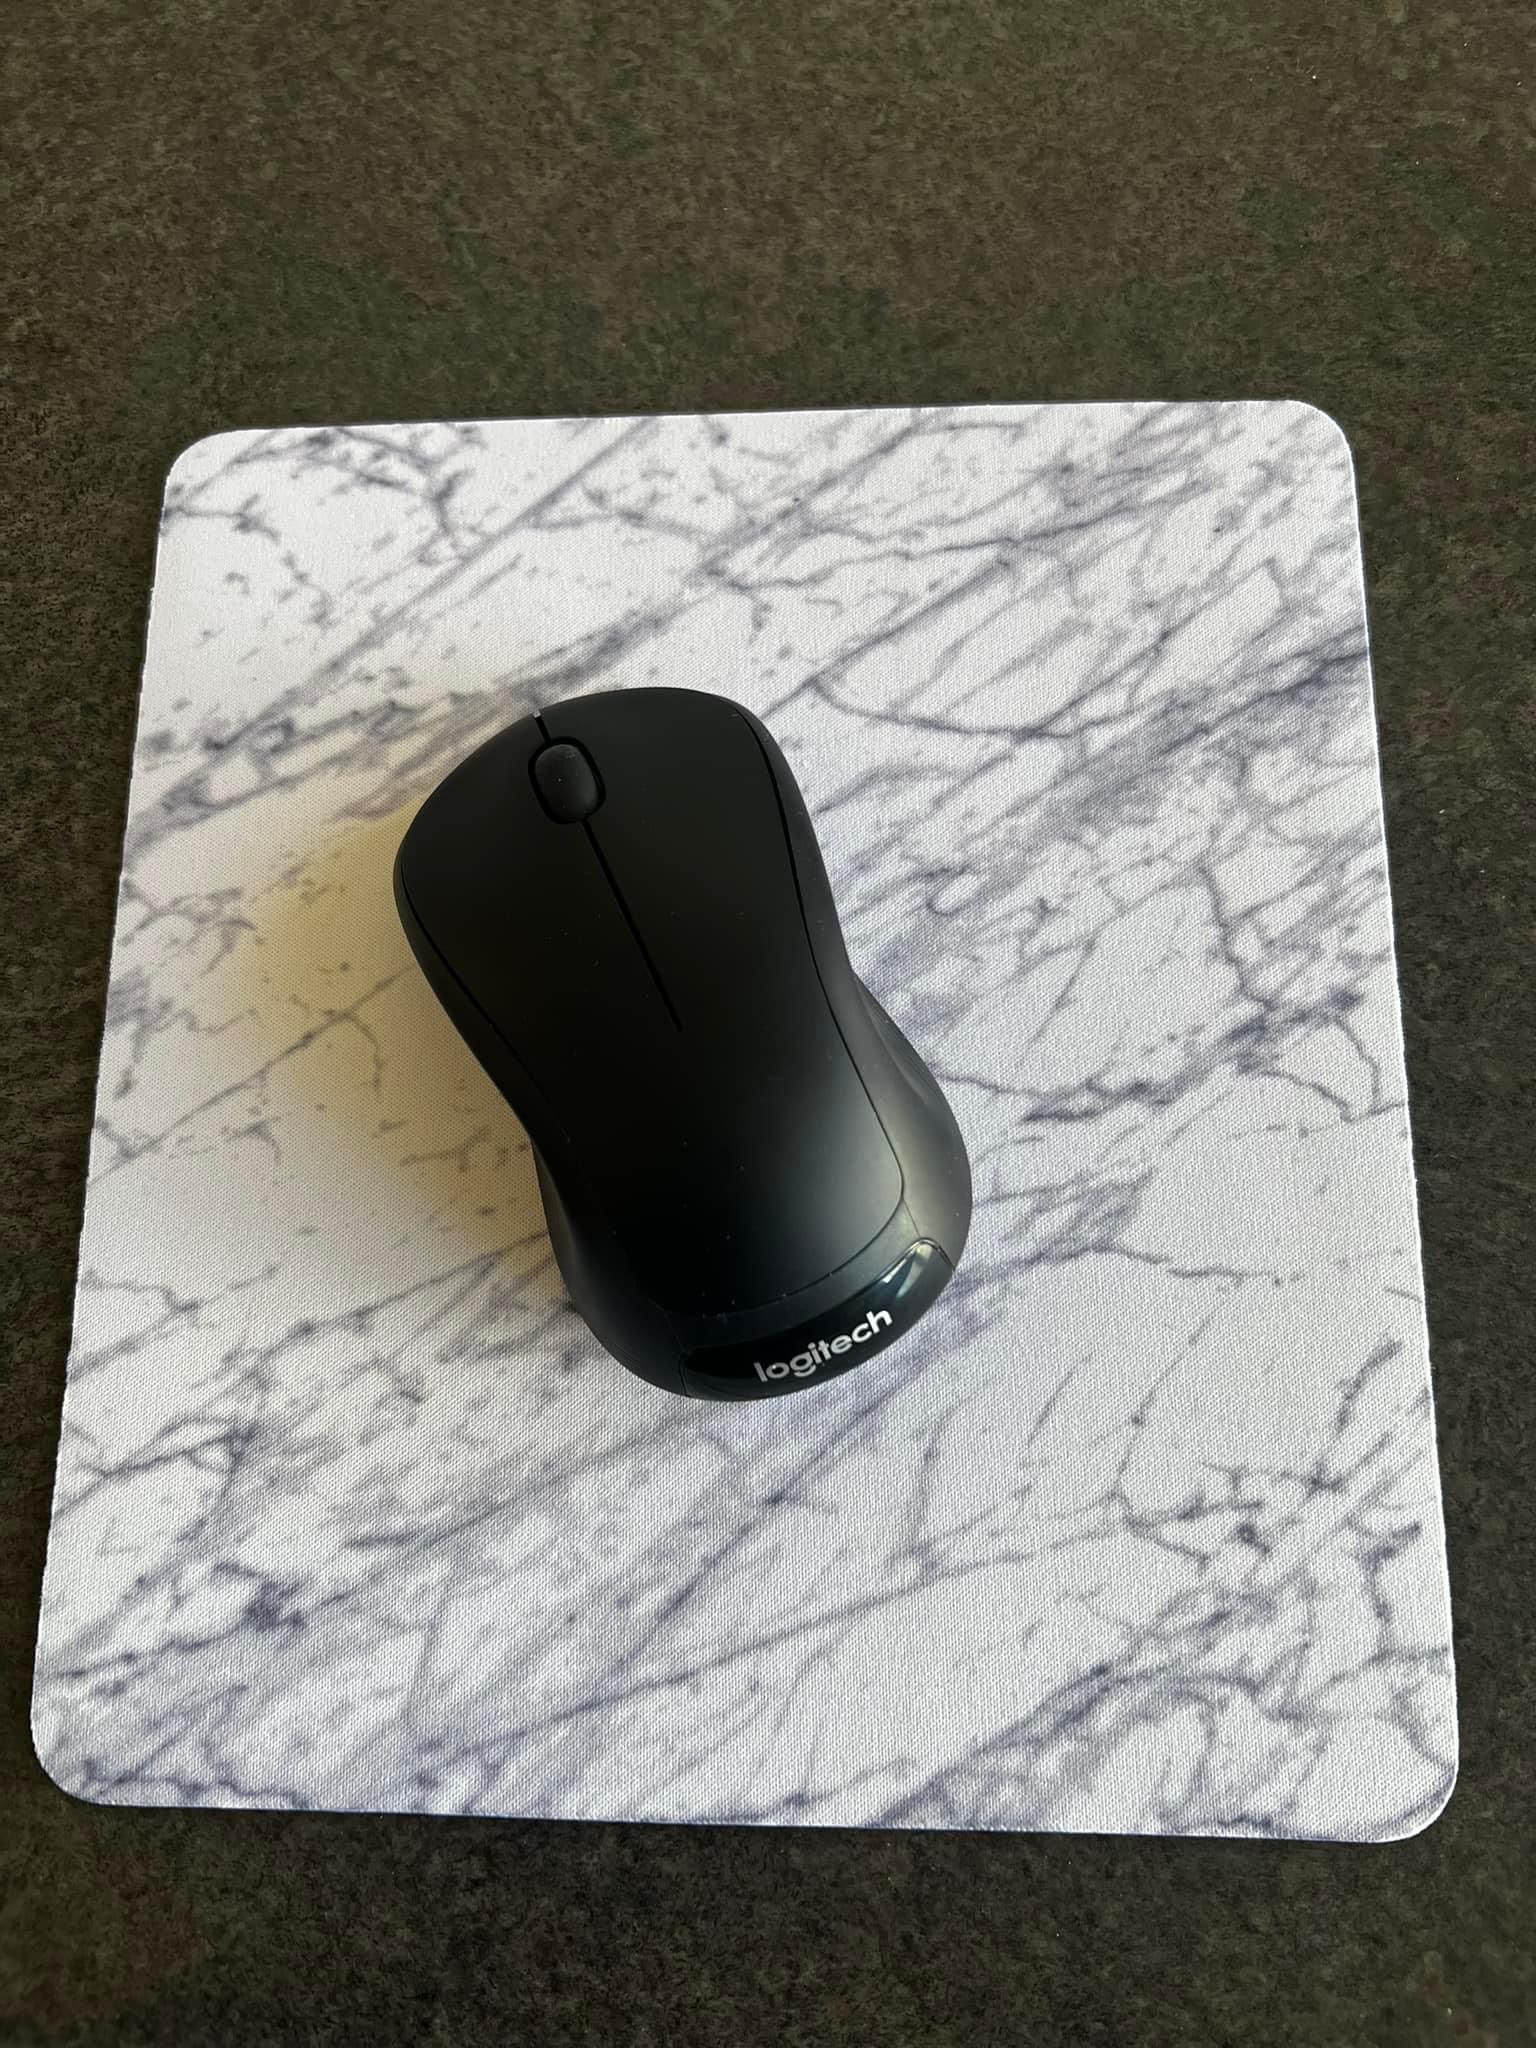 Logitech wireless mouse and mouse pad- NEW! 